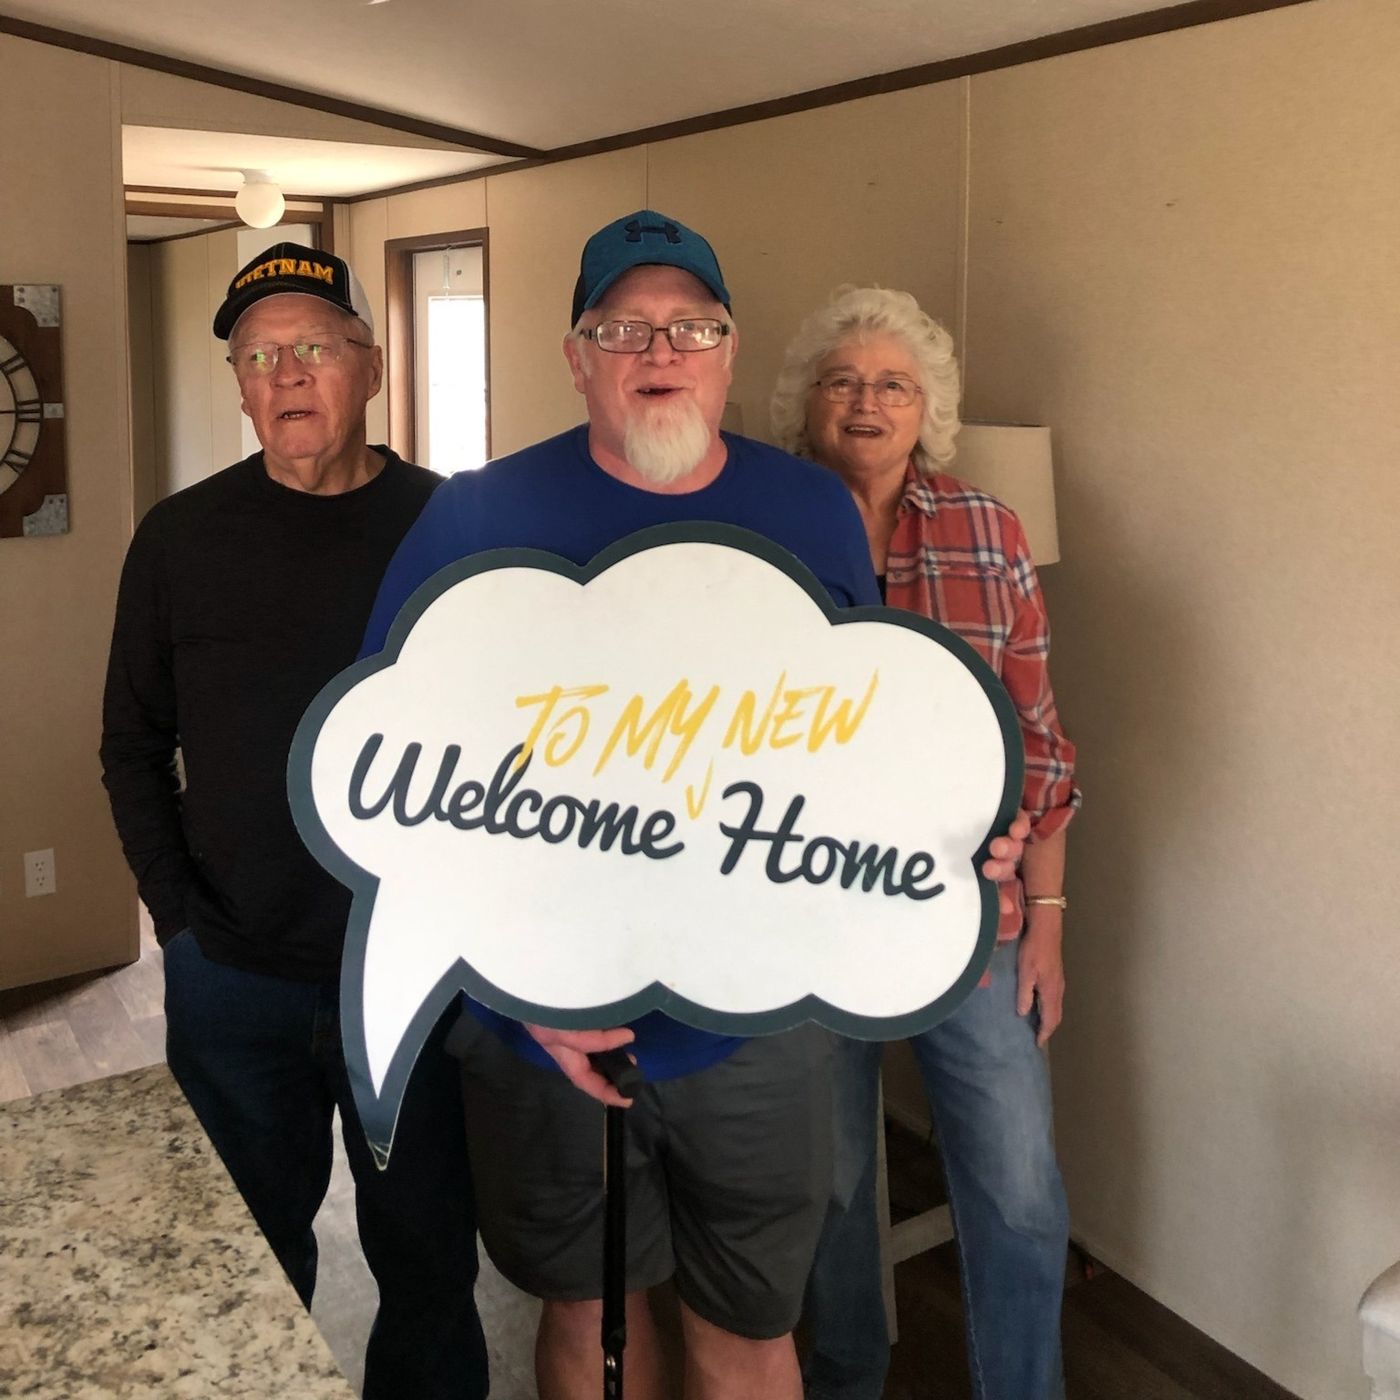 FRED S. welcome home image